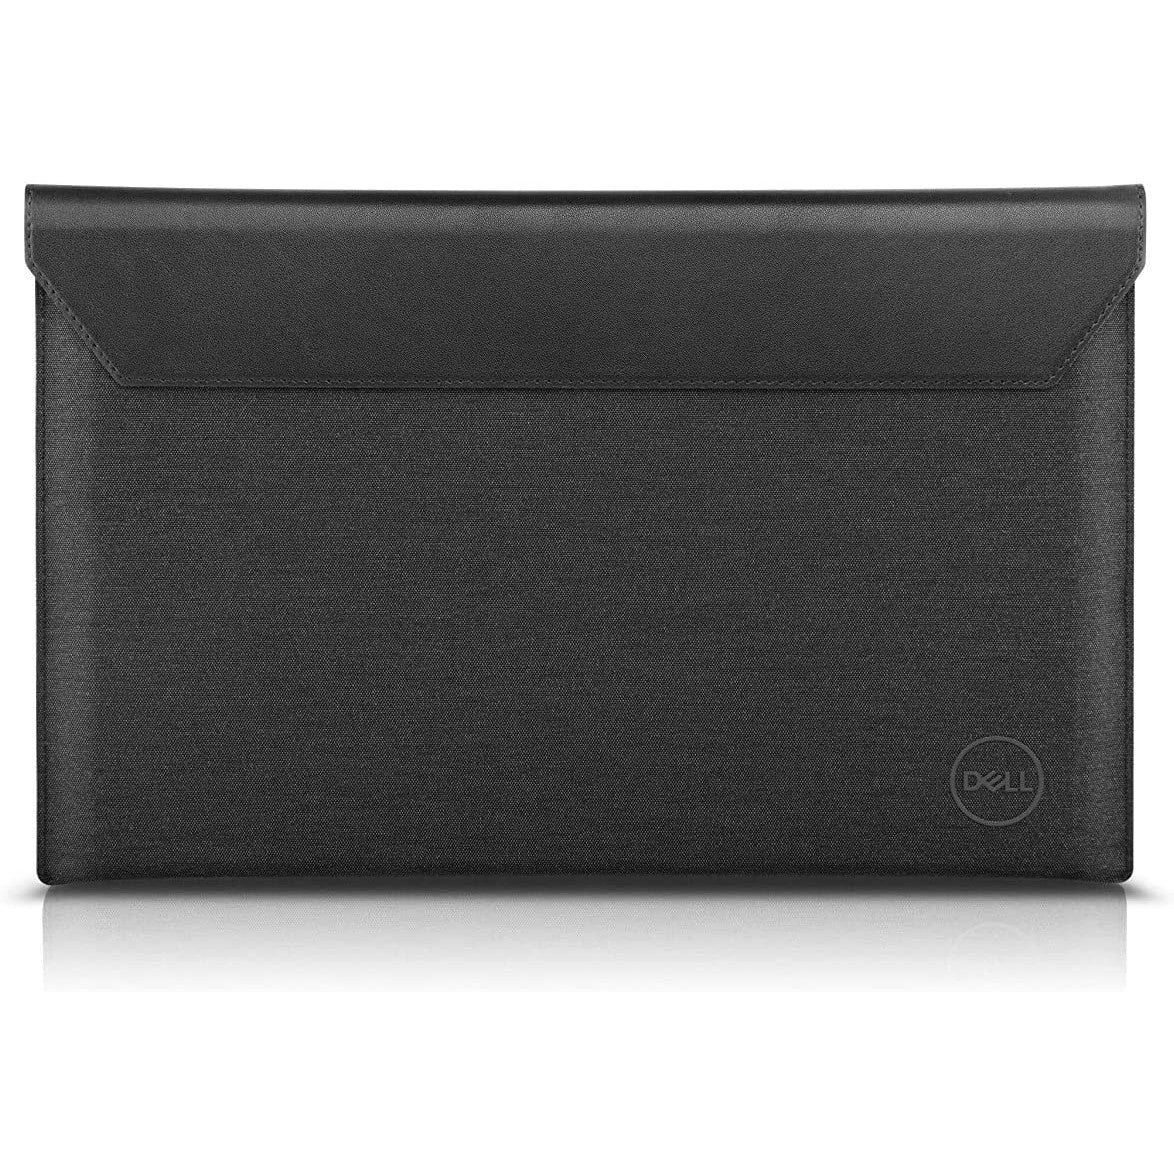 Dell Premier Sleeve for Dell XPS Laptops - Grey